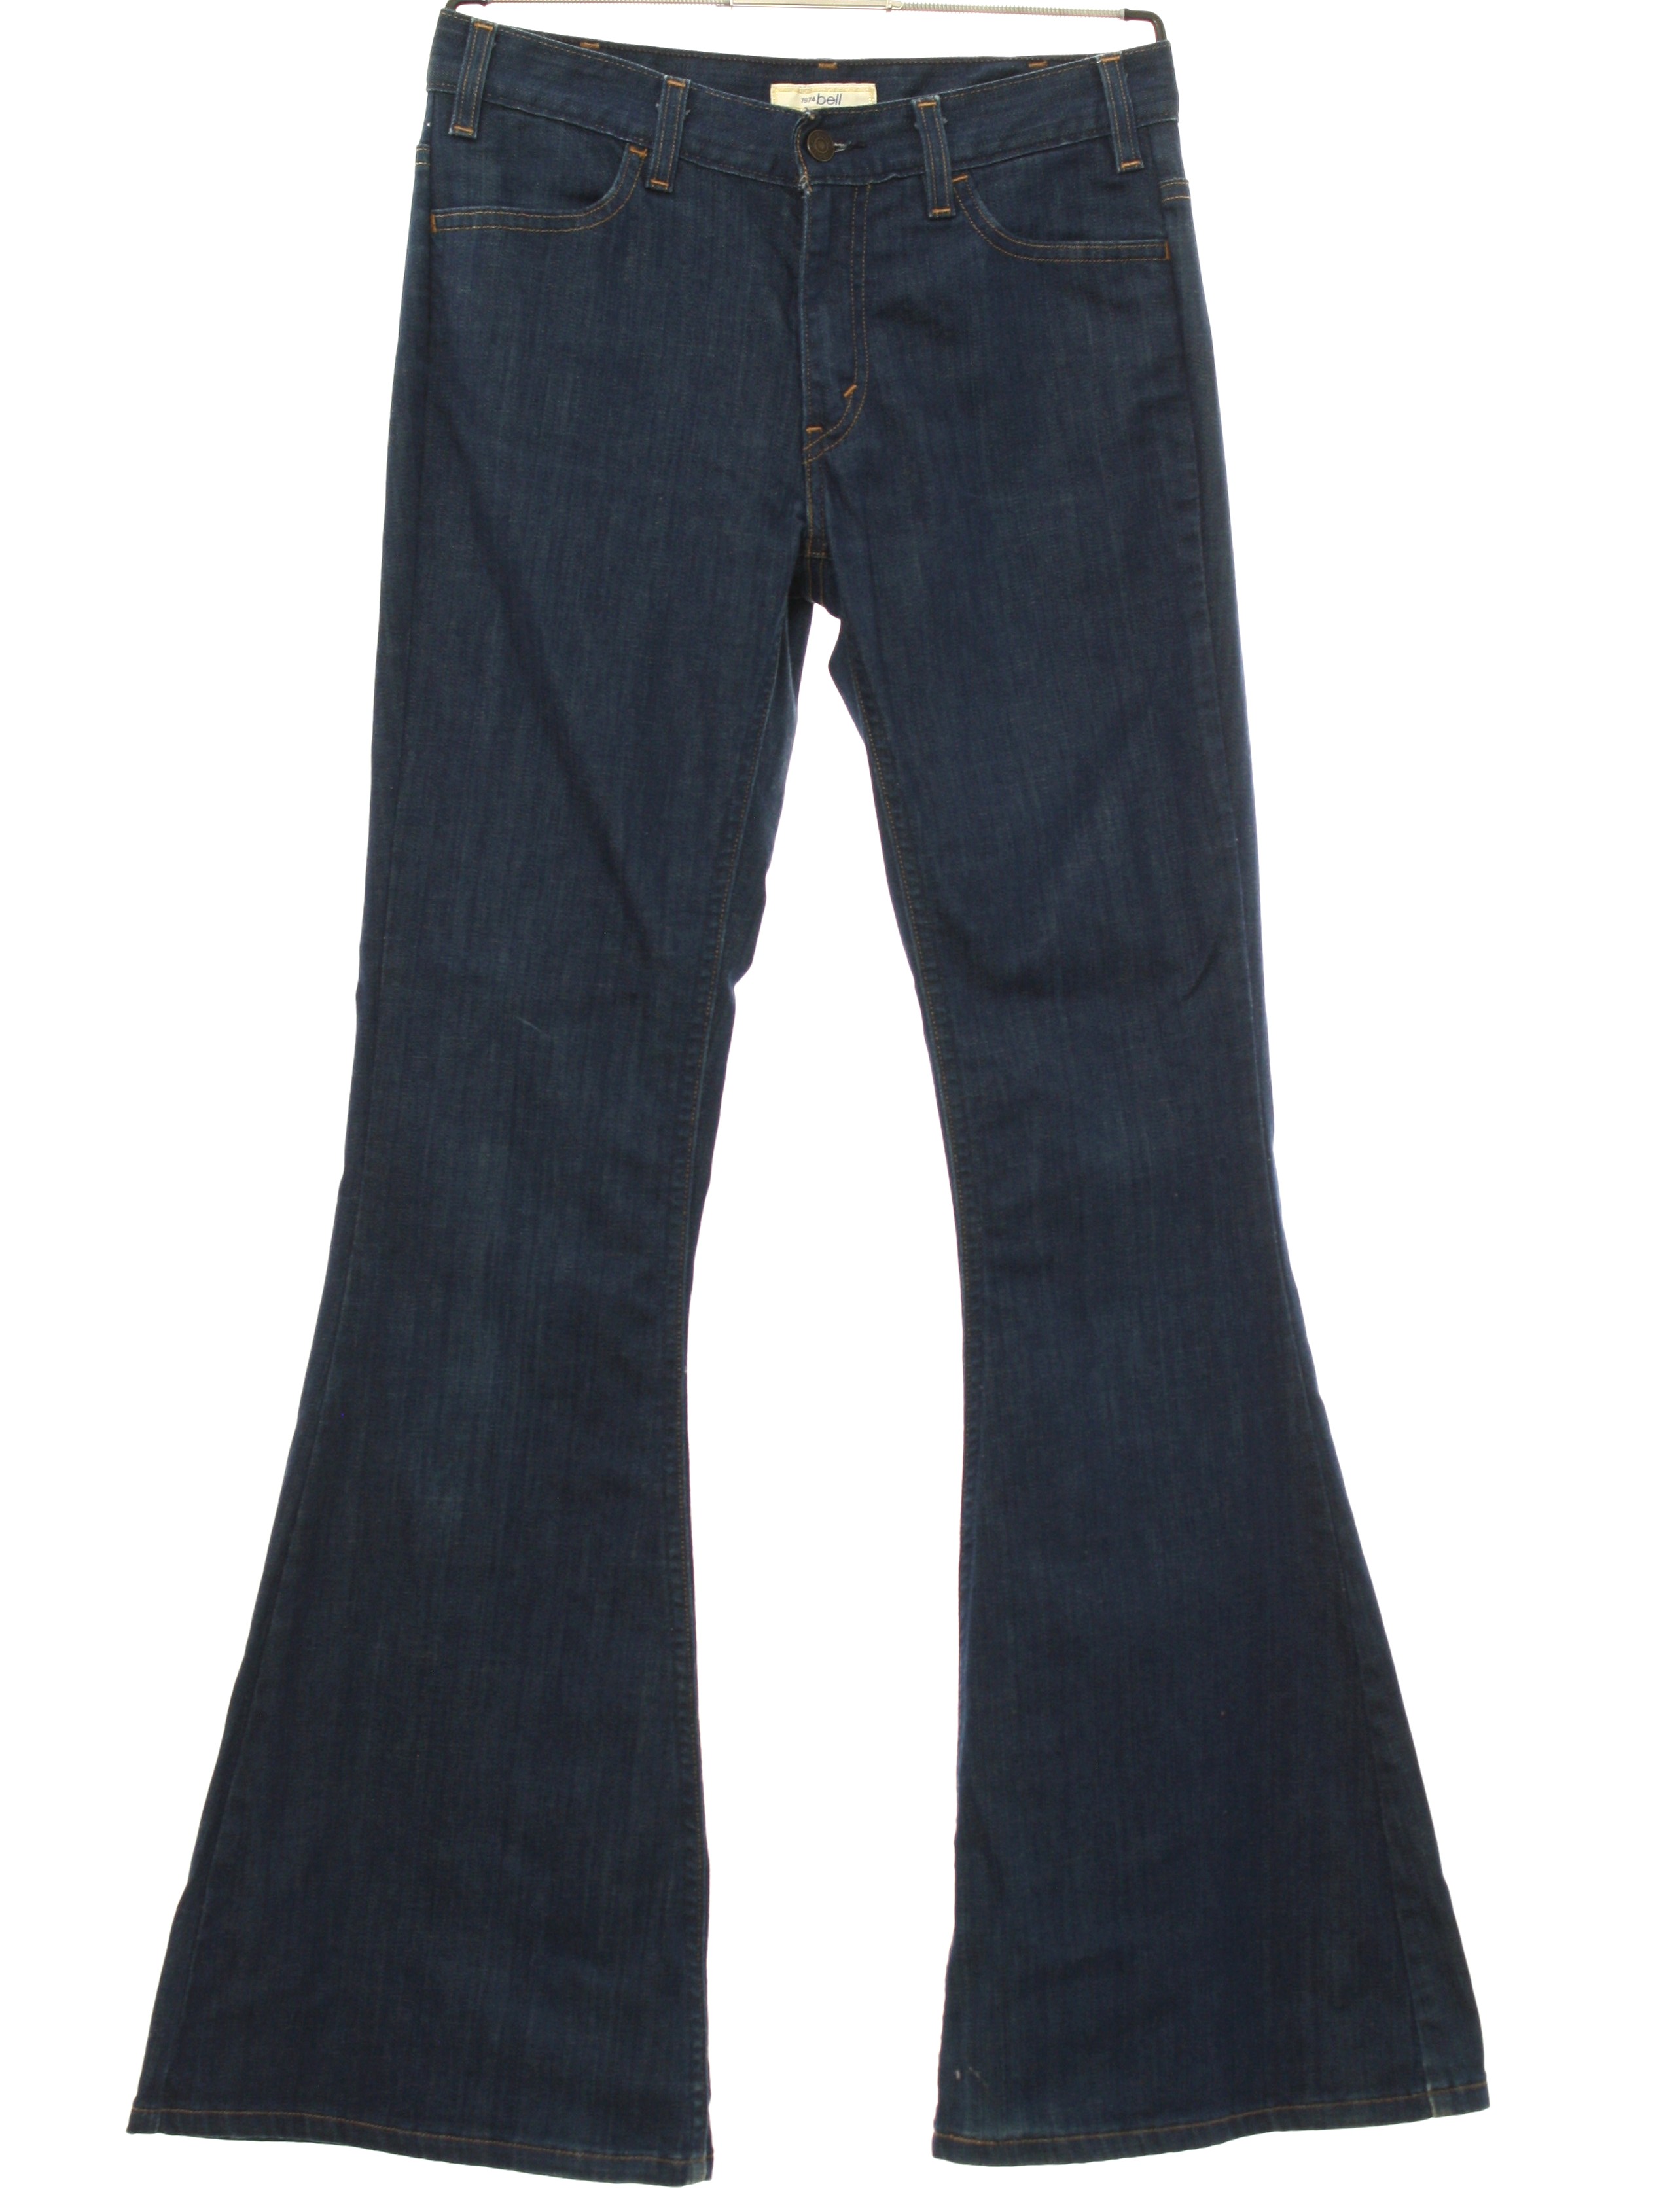 70s Retro Bellbottom Pants: 70s style (made in 90s) -Levis, 1974 Bell ...